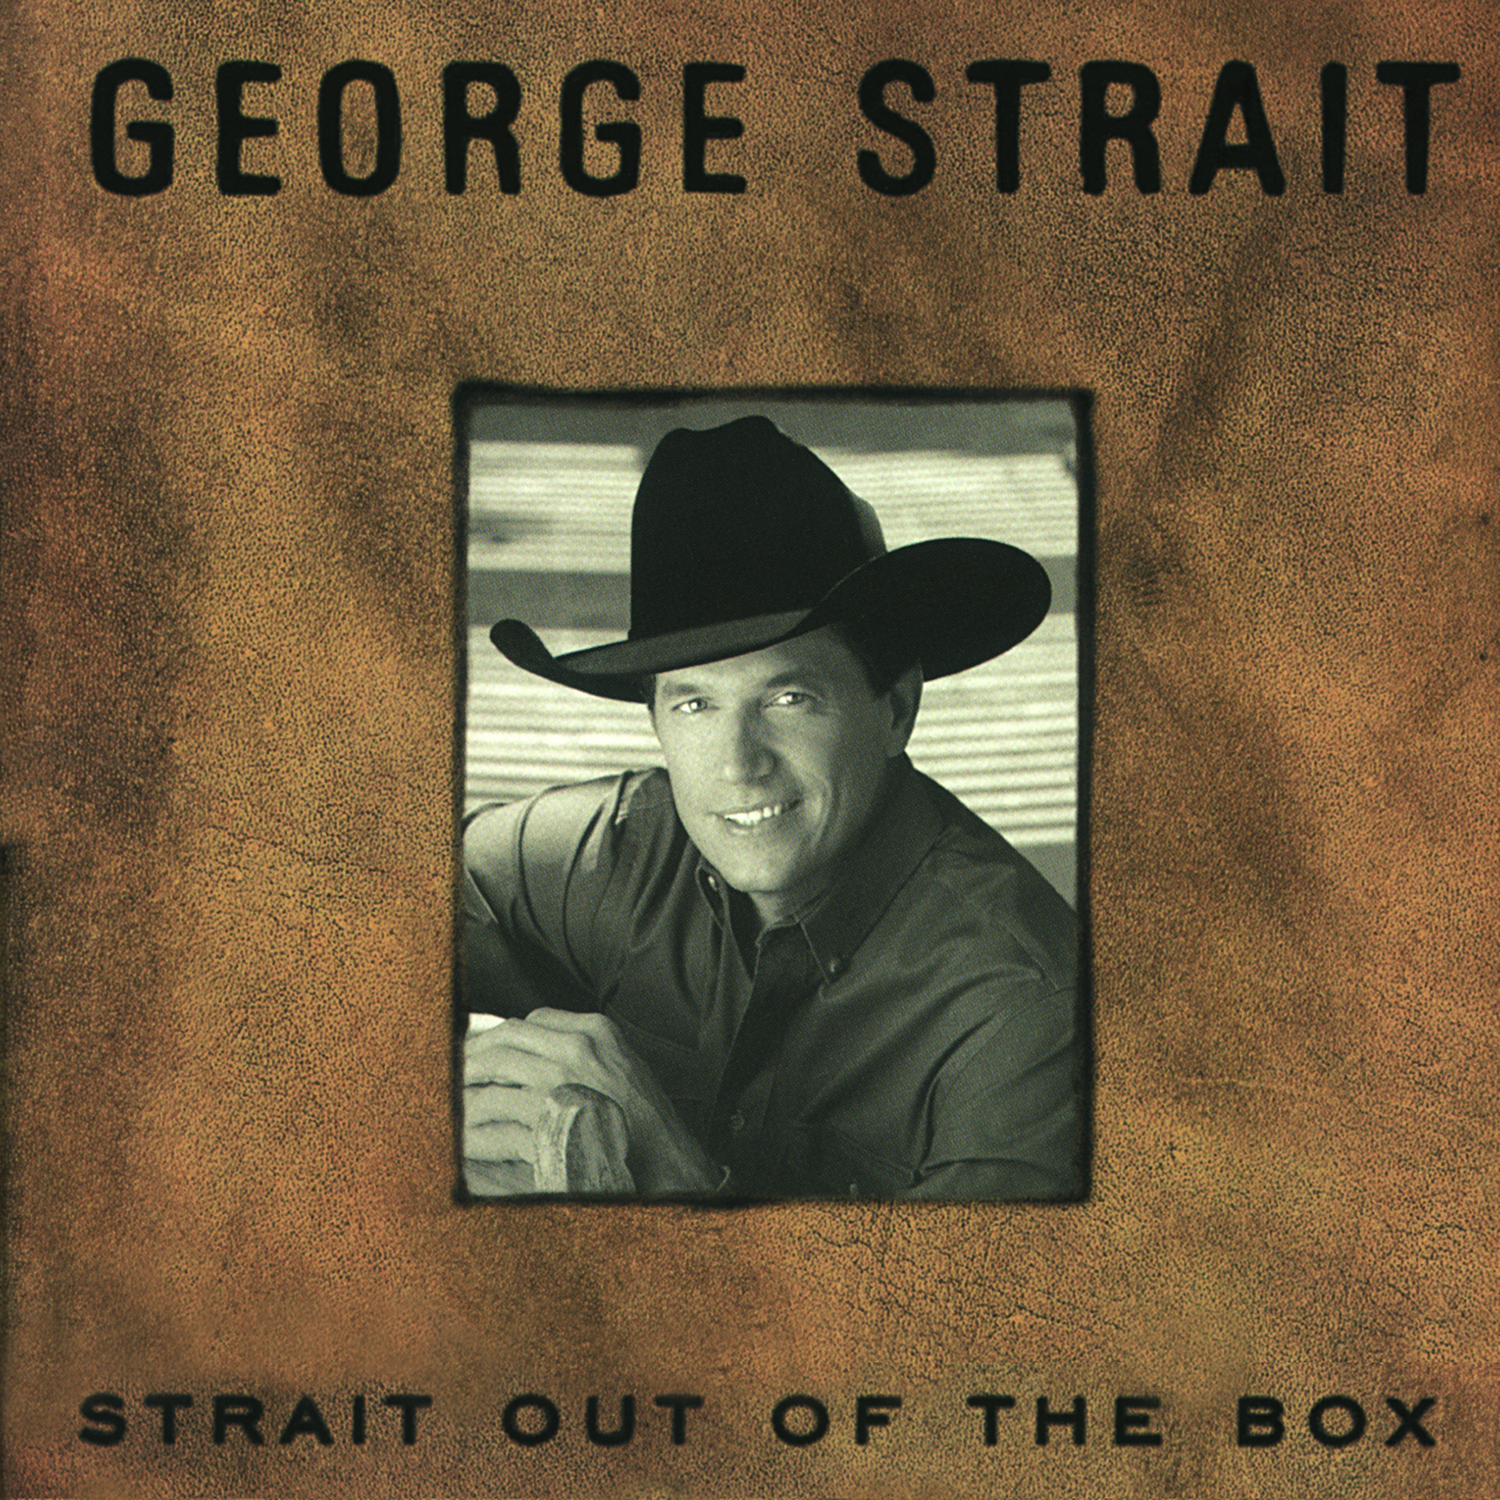 George Strait - Amarillo By Morning